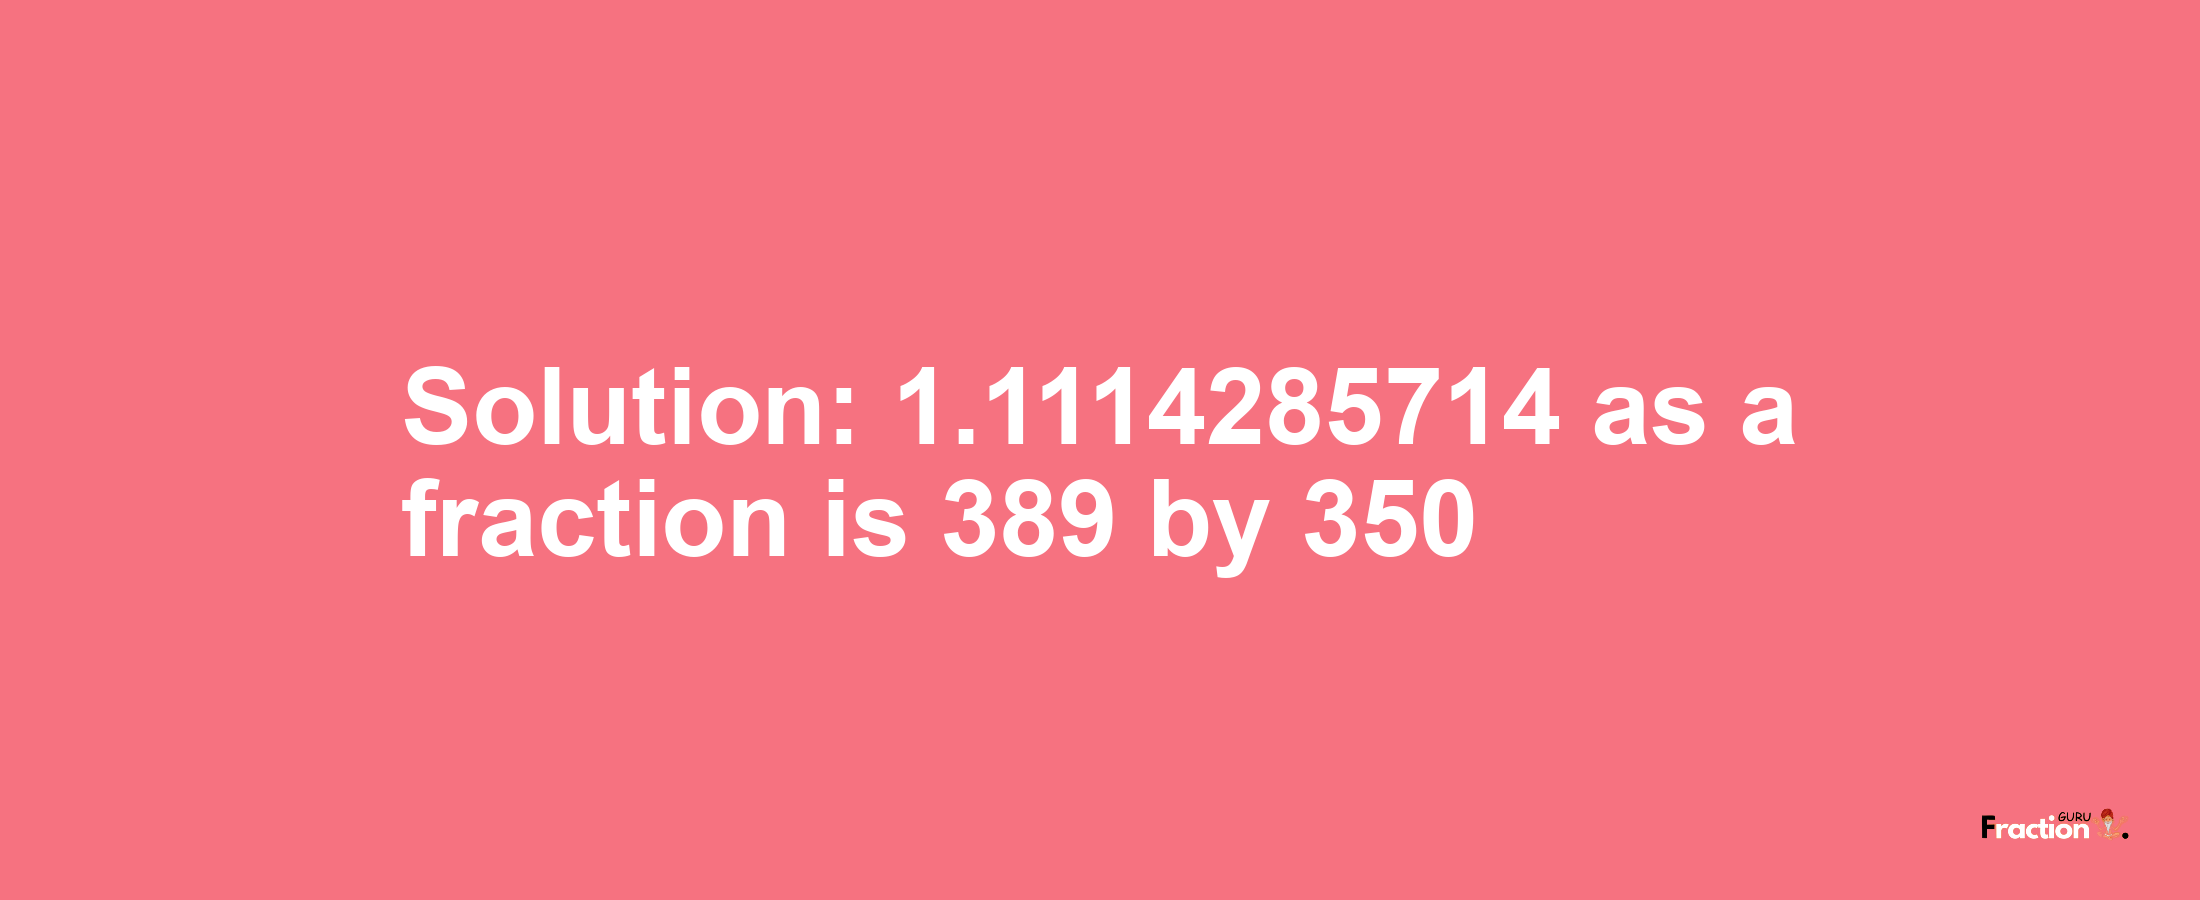 Solution:1.1114285714 as a fraction is 389/350